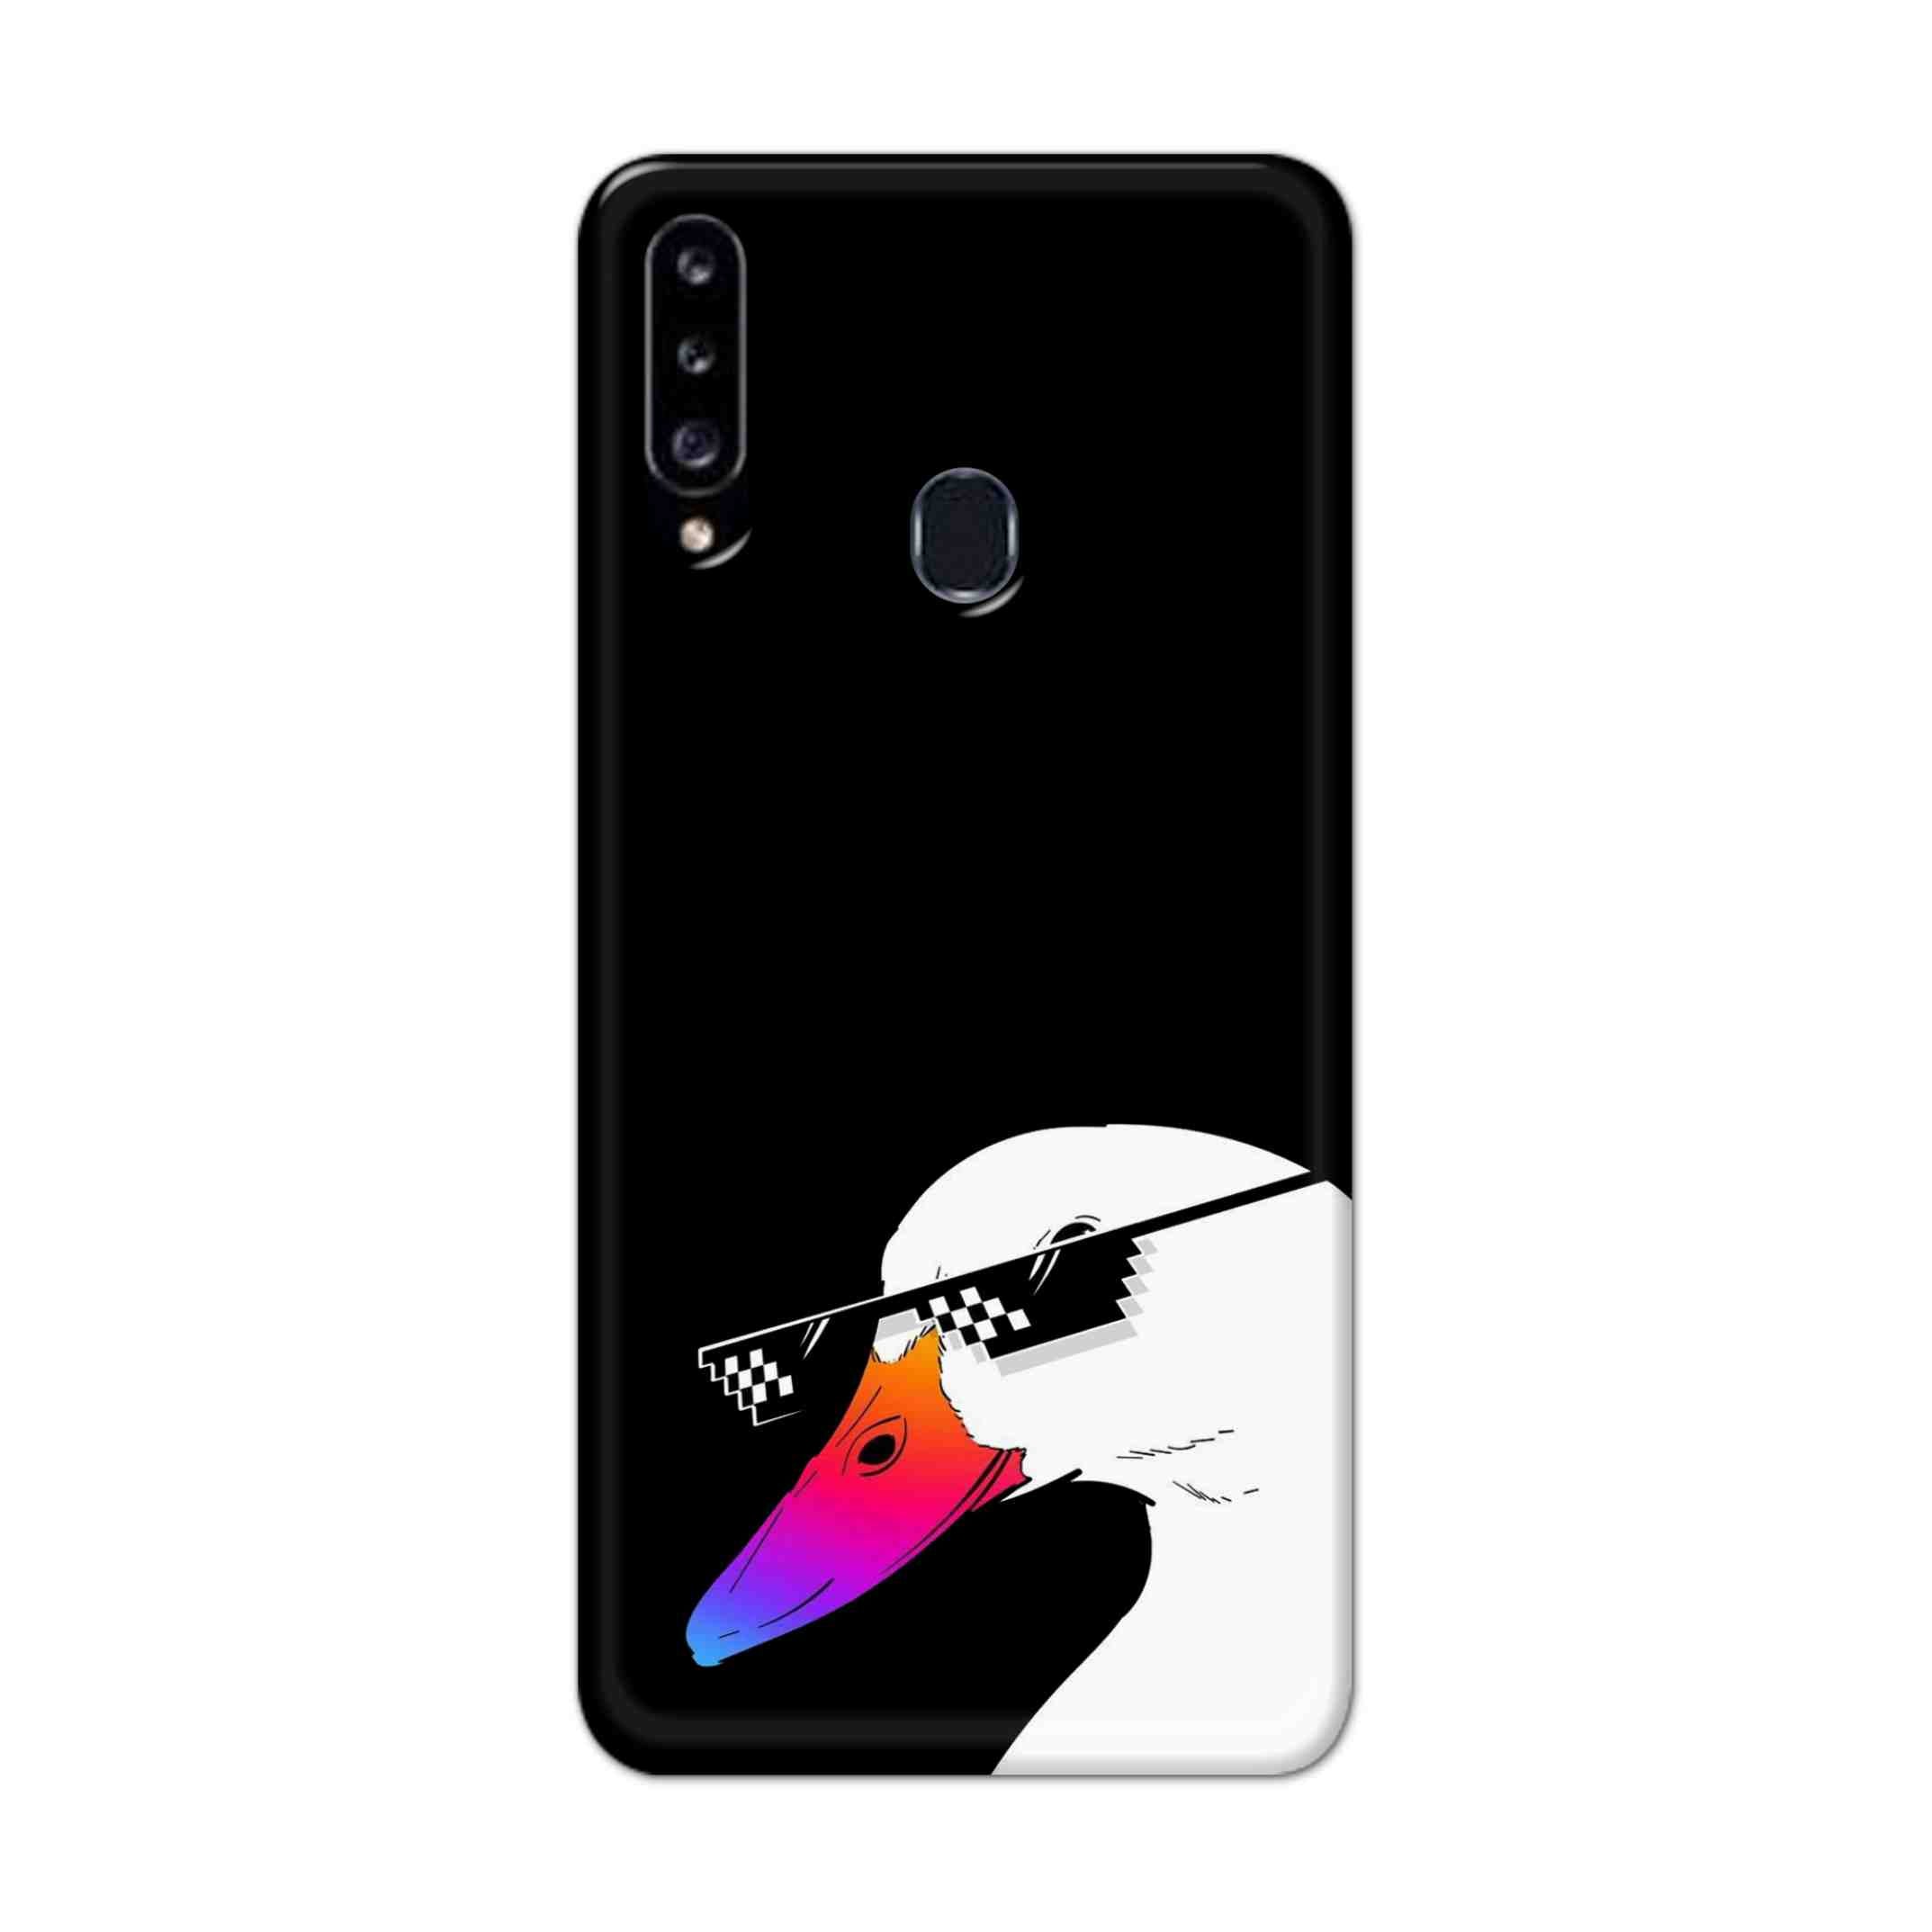 Buy Neon Duck Hard Back Mobile Phone Case Cover For Samsung Galaxy A21 Online